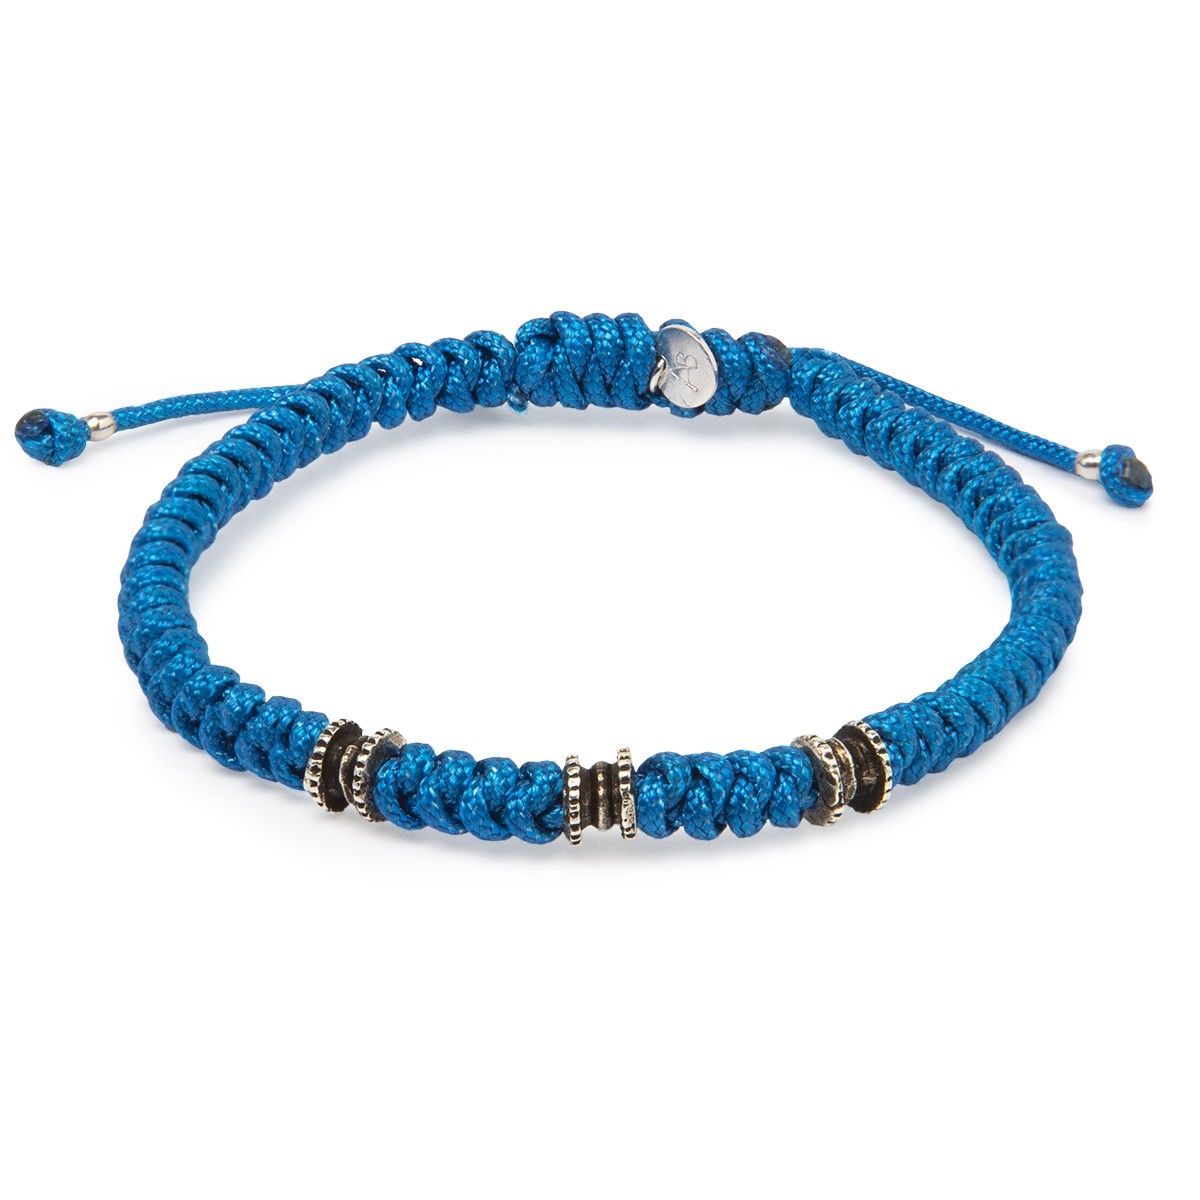 BLUE AND SILVER CORD BRACELET 16CM